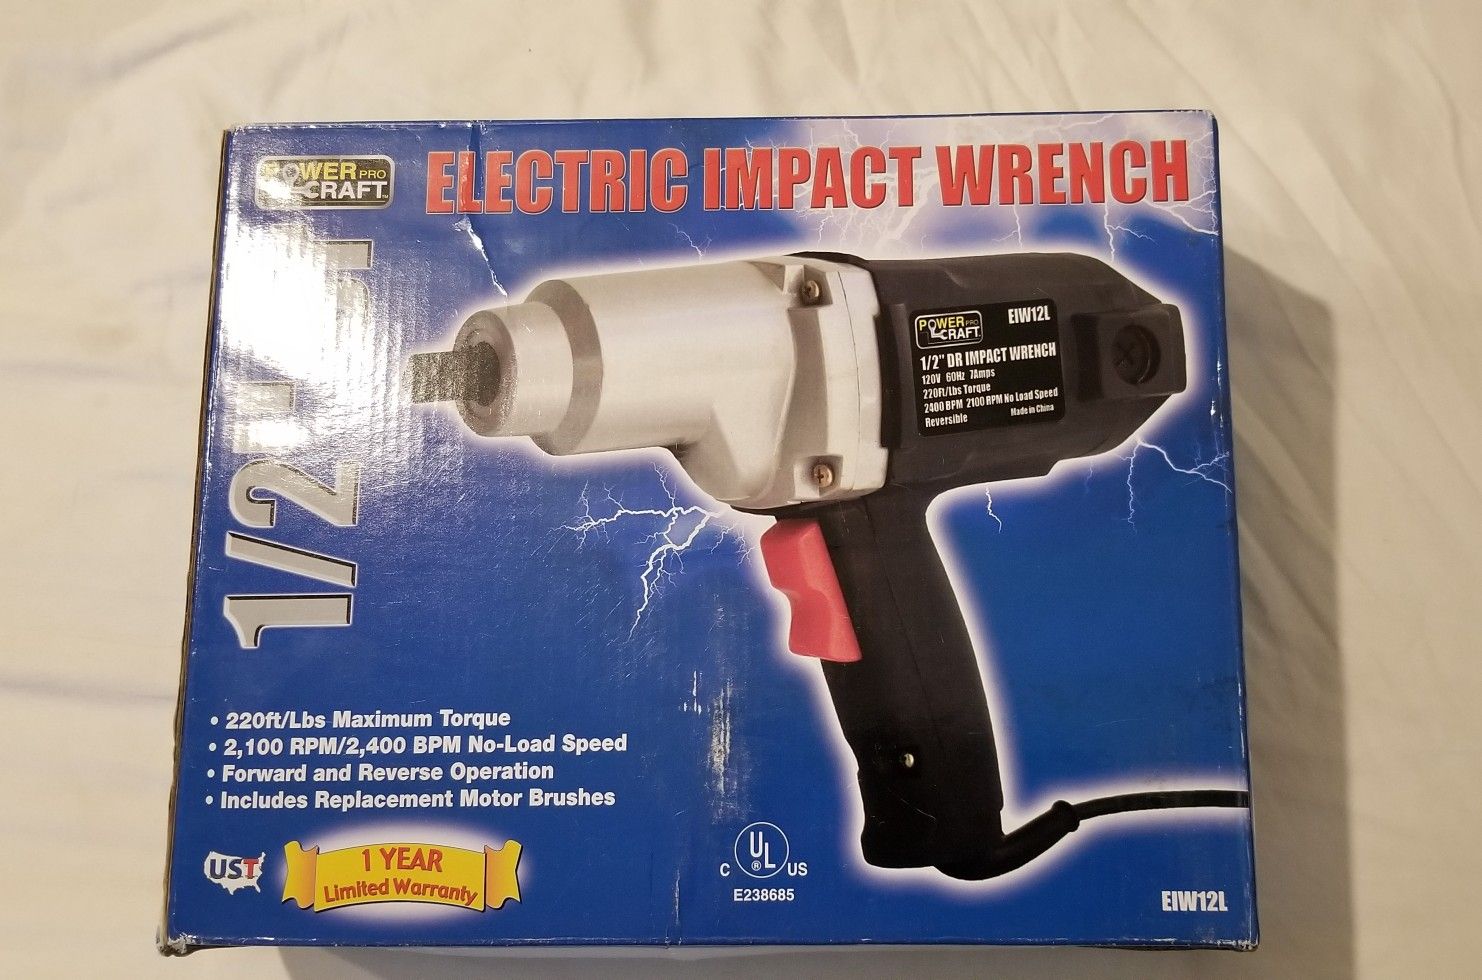 Power Craft Pro Impact Wrench